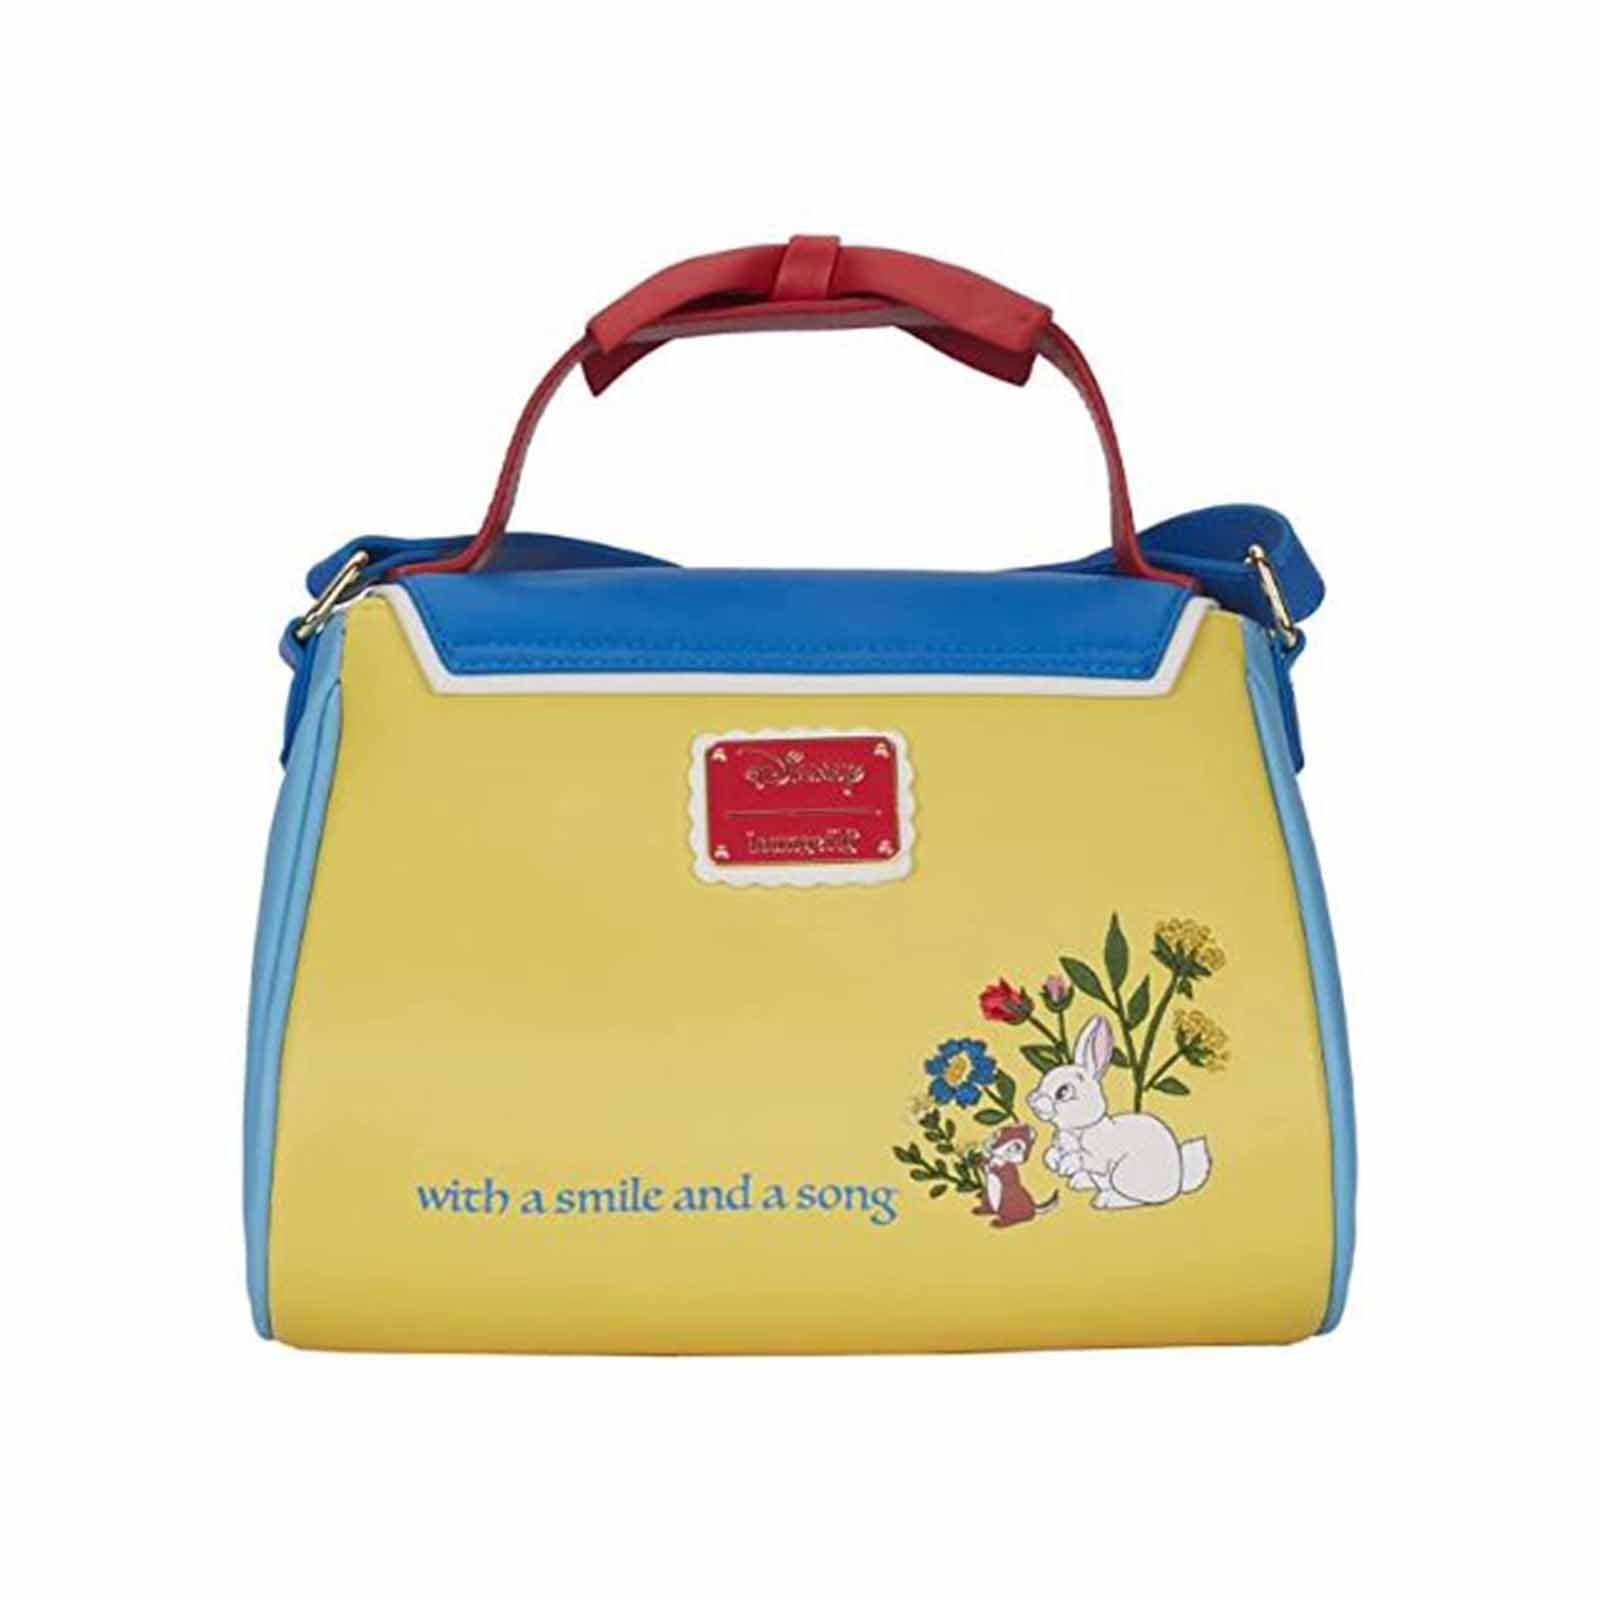 New Kate Spade x Snow White Collection Debuts in Disney Springs -  MickeyBlog.com